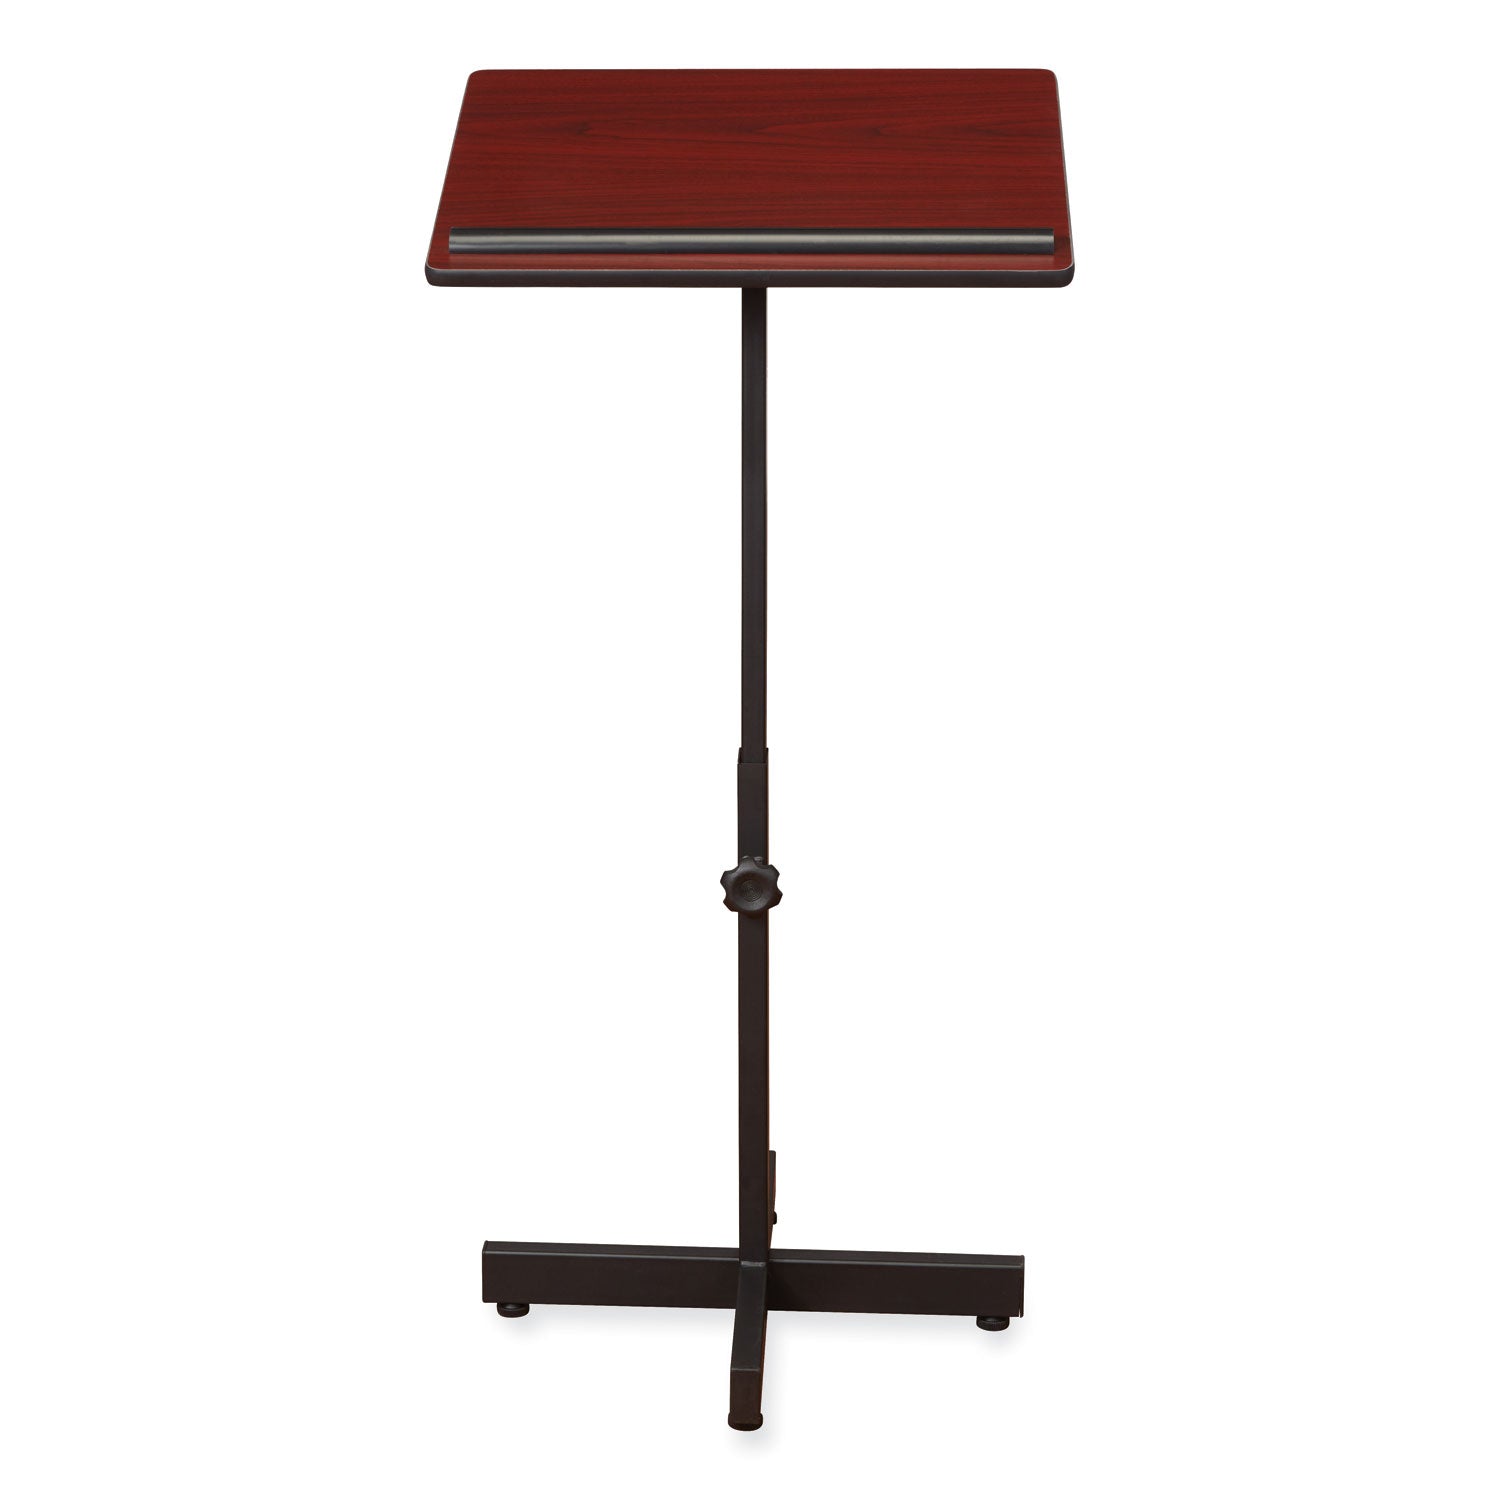 portable-presentation-lectern-stand-20-x-1825-x-44-mahogany-ships-in-1-3-business-days_nps70my - 2